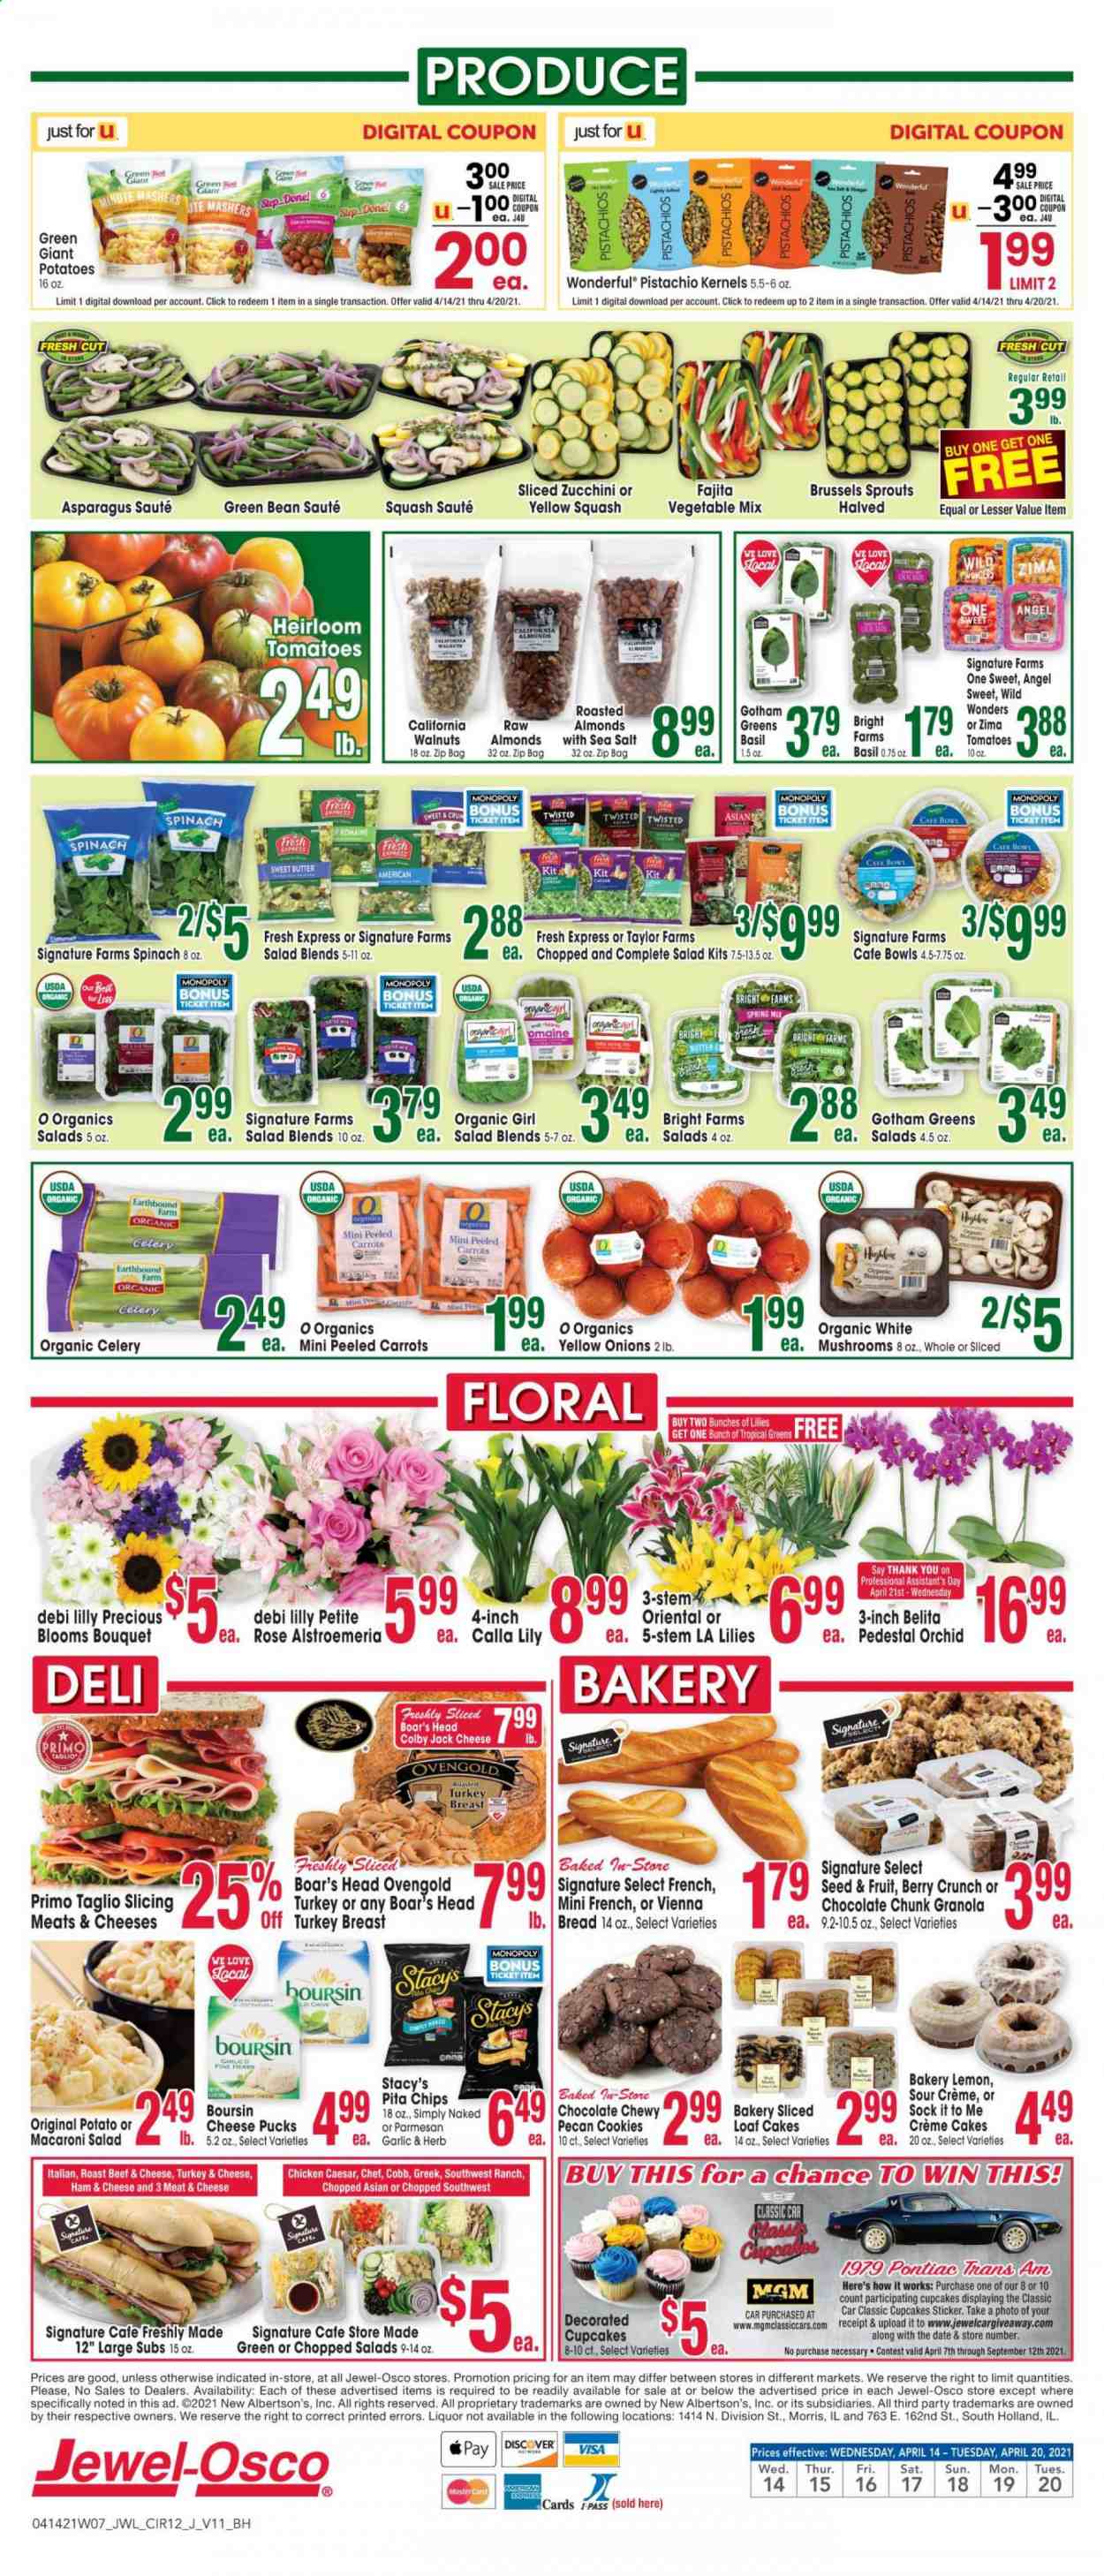 thumbnail - Jewel Osco Flyer - 04/14/2021 - 04/20/2021 - Sales products - mushrooms, bread, cake, cupcake, asparagus, carrots, celery, spinach, tomatoes, zucchini, potatoes, onion, salad, brussel sprouts, yellow squash, fajita, ham, macaroni salad, Colby cheese, parmesan, butter, cookies, chocolate, chips, granola, esponja, almonds, walnuts, pistachios, wine, turkey breast, beef meat, roast beef, sticker, plant seeds, bunches, bouquet, rose, Alstroemeria. Page 12.